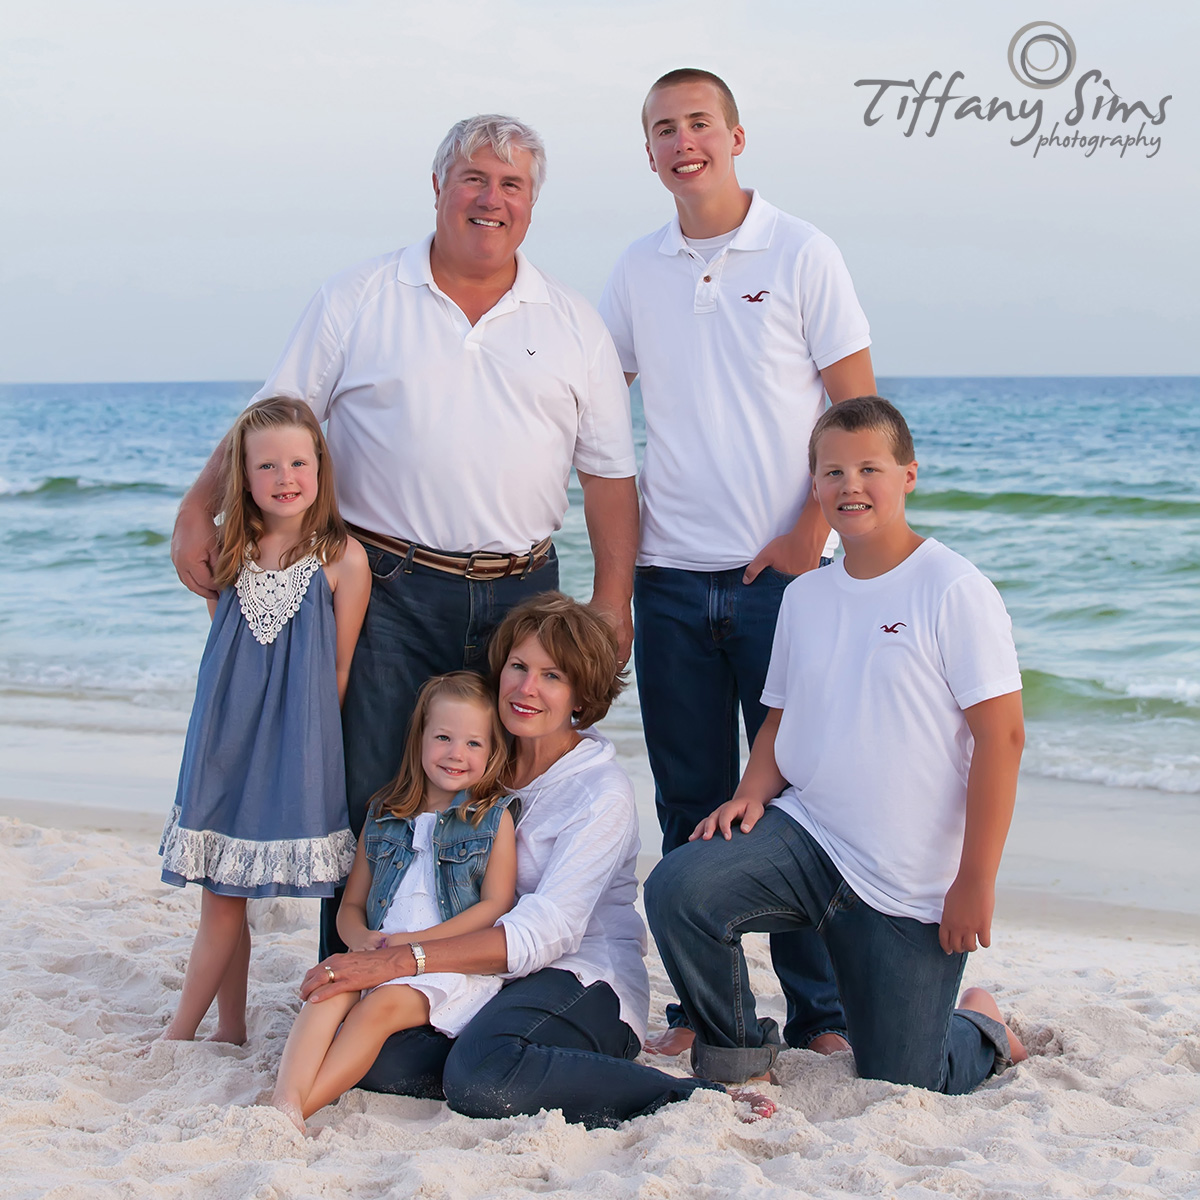 Destin Photography by Tiffany Sims Photography #destin #destinphotography #destinbeachphotography #30aphotography #30abeachphotography #destinphotographer #30aphotographer #fortwaltonbeachphotography #okaloosaislandphotography | KH52rw